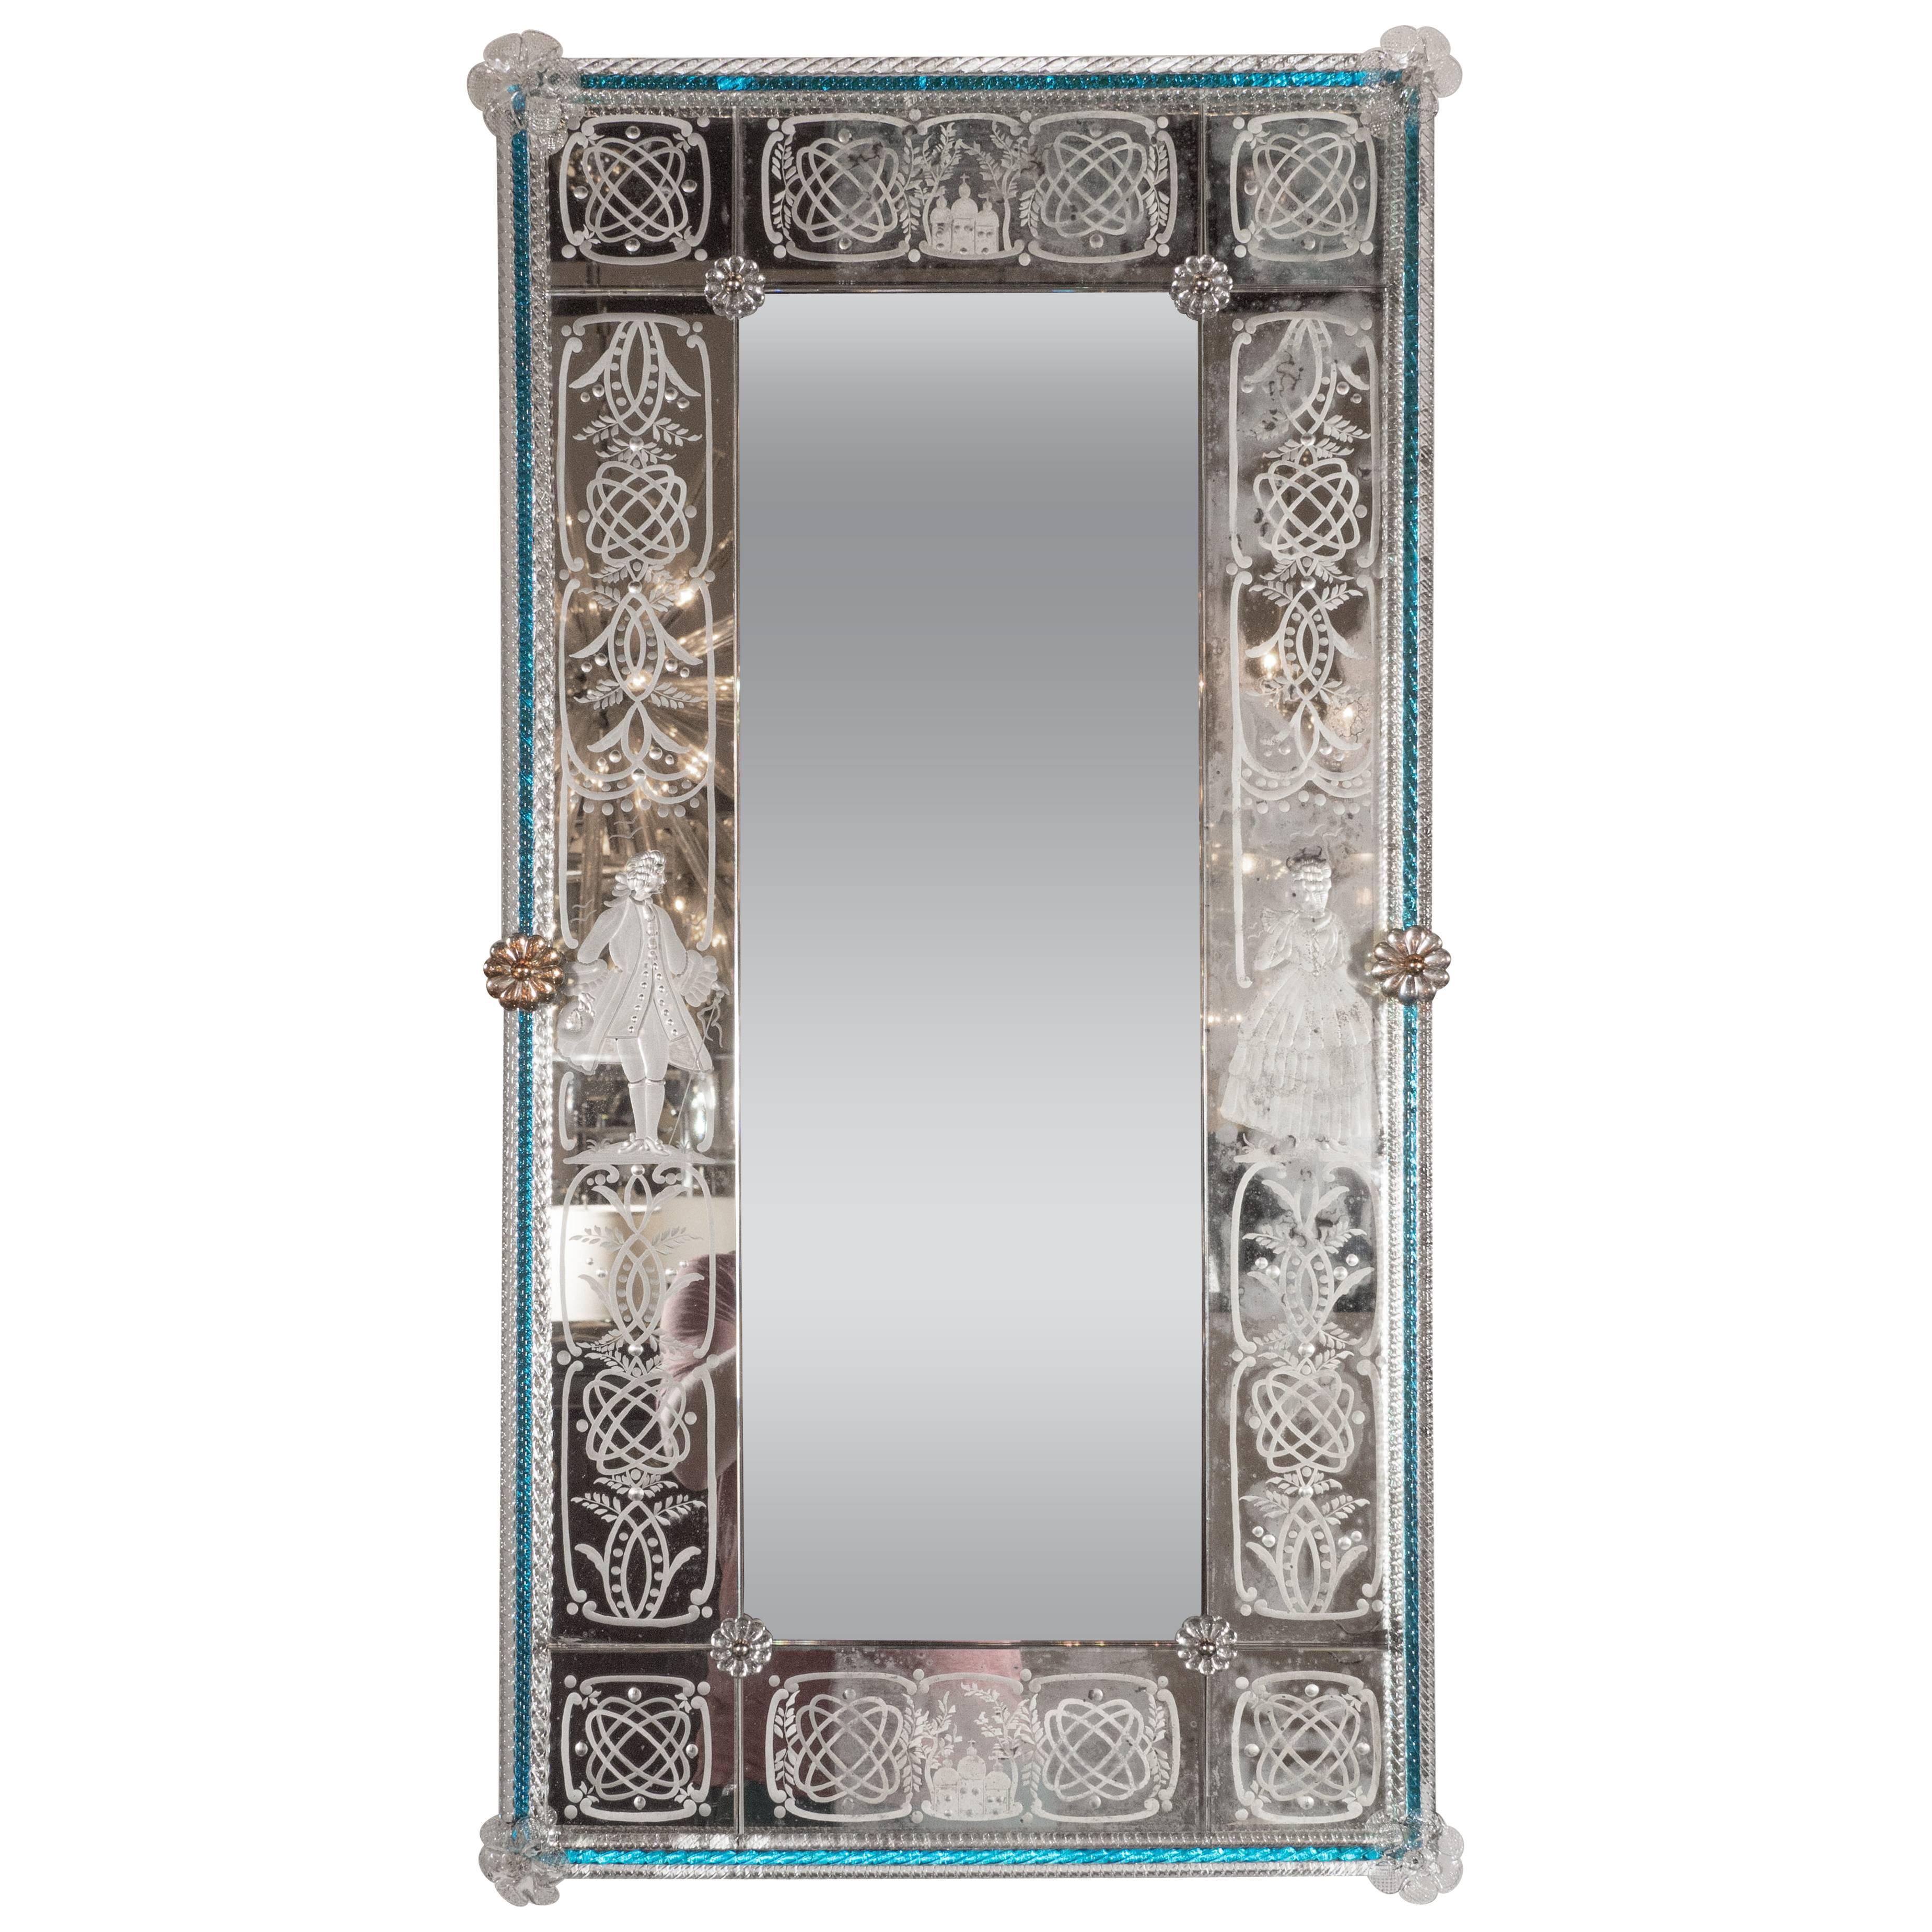 Venetian Handmade Reverse Etched Mirror W/ Murano Applique and Cerulean Border